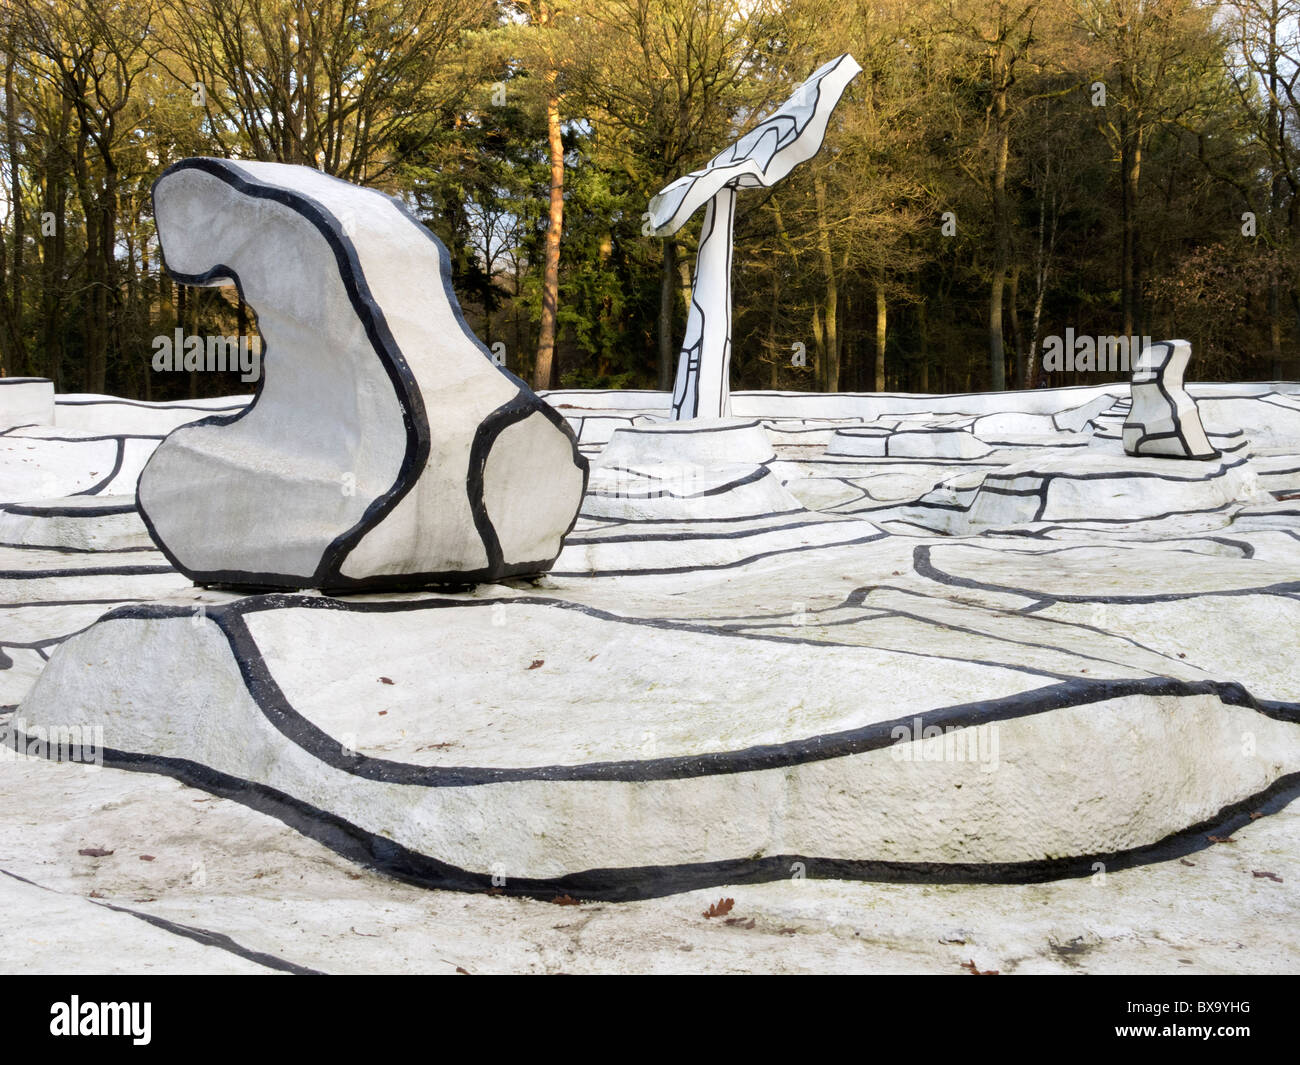 Sculpture Jardin d'email by Jean Dubuffet at Kroller-Muller Museum in The Netherlands Stock Photo